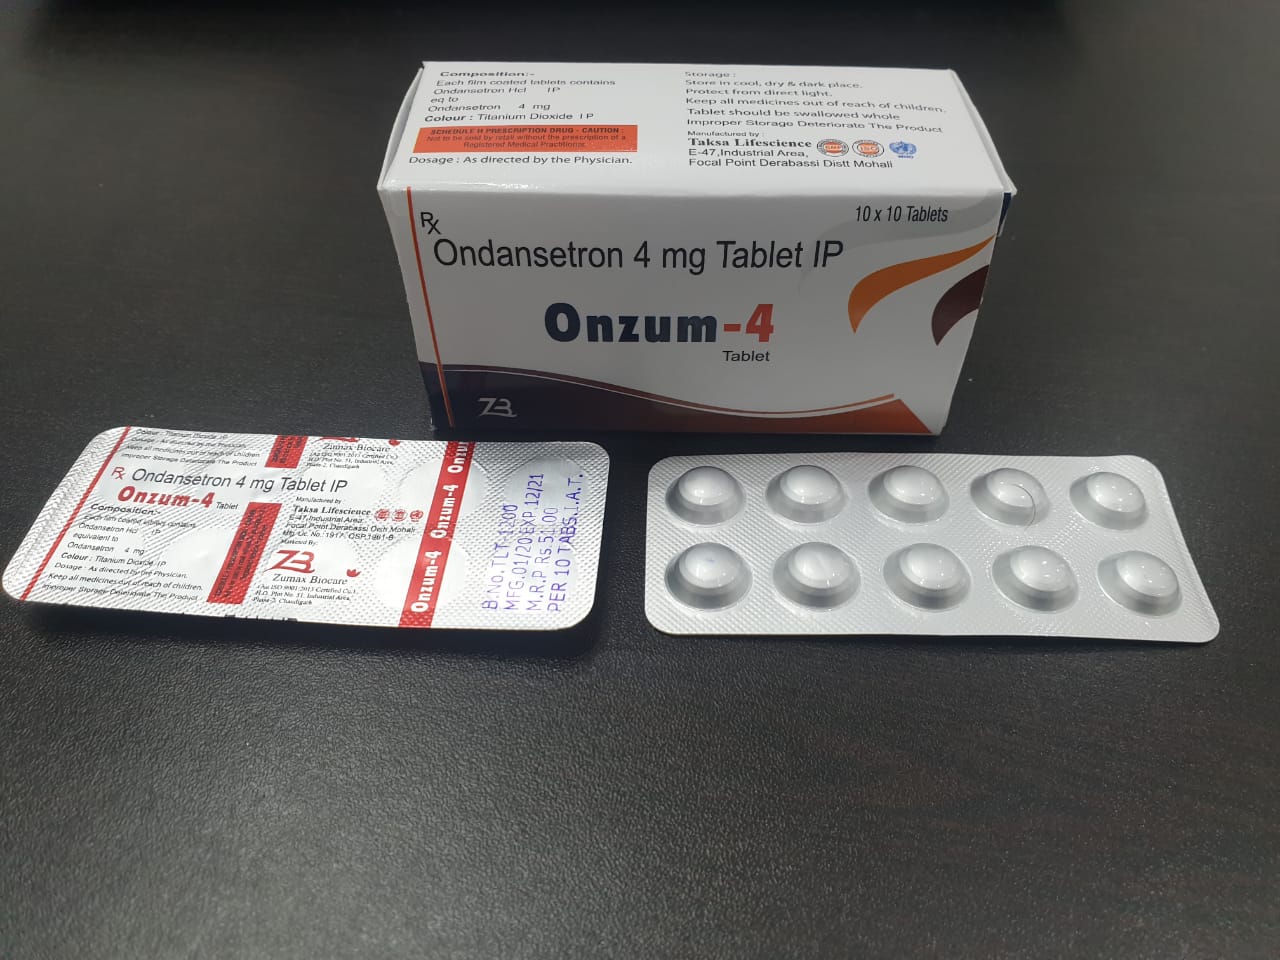 Product Name: ONZUM 4, Compositions of ONZUM 4 are Ondansetron 4mg Tablets IP - Zumax Biocare